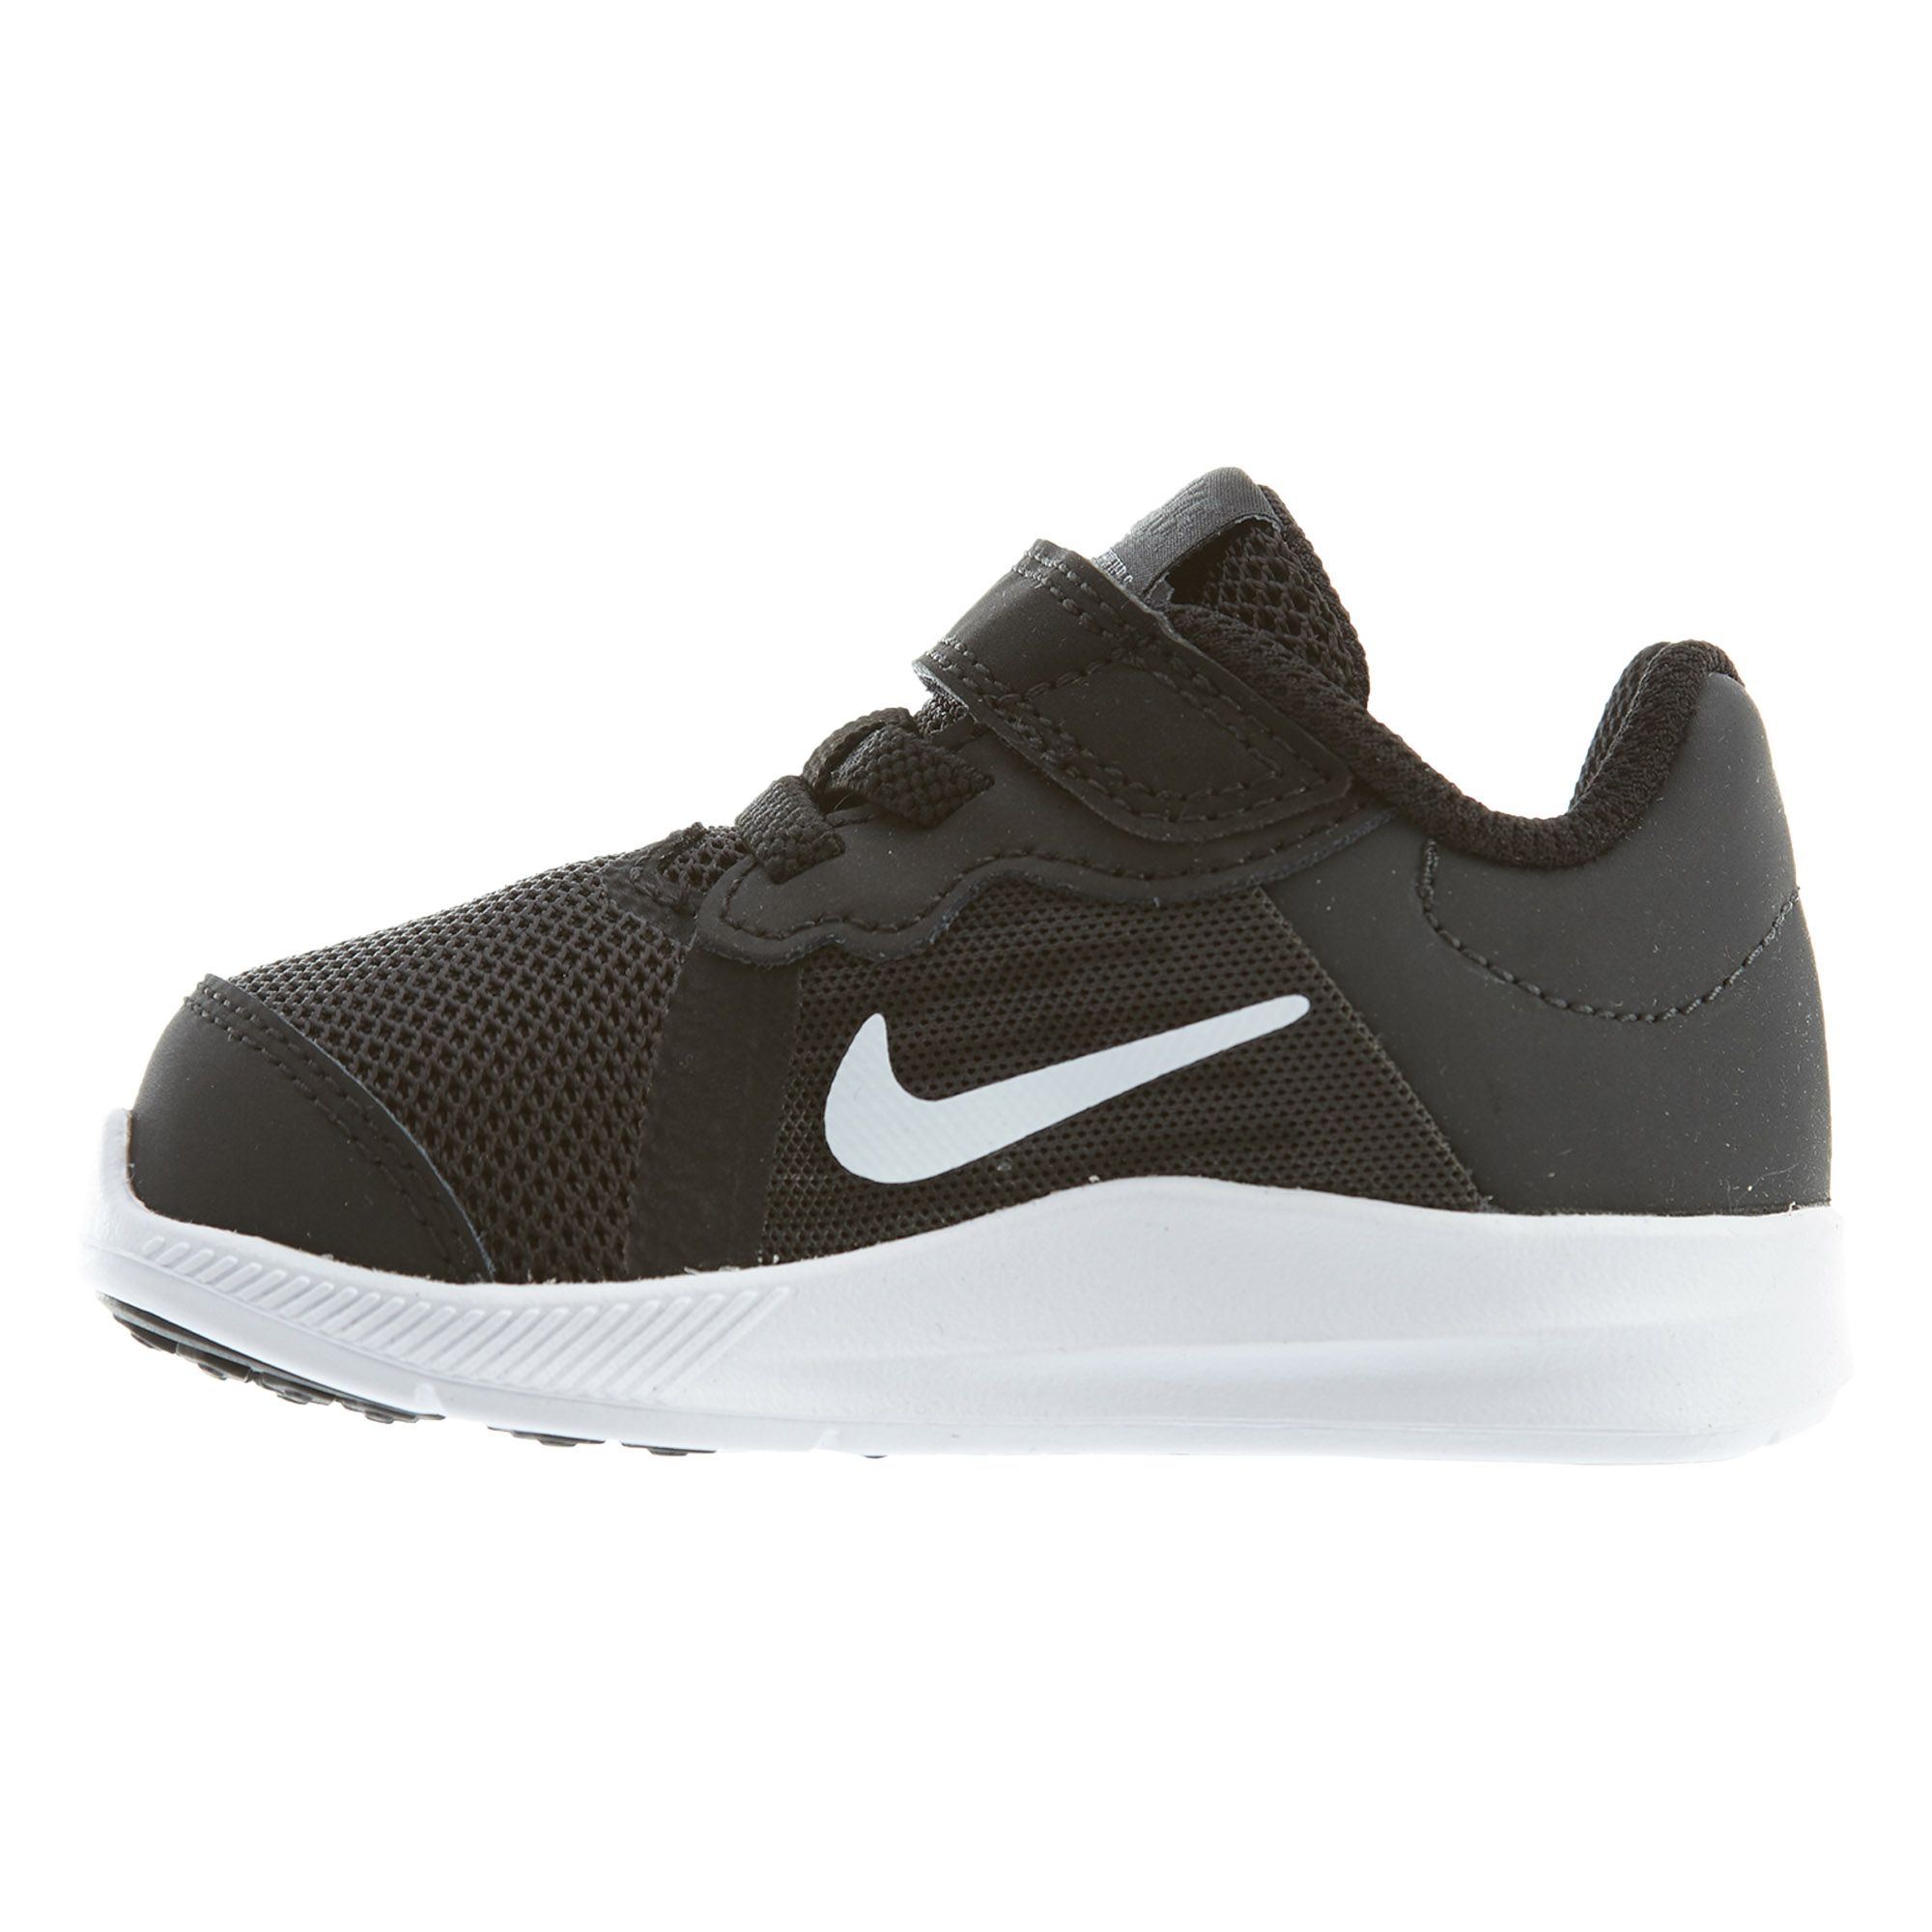 Nike Downshifter 8 Toddlers Style : 922856-001